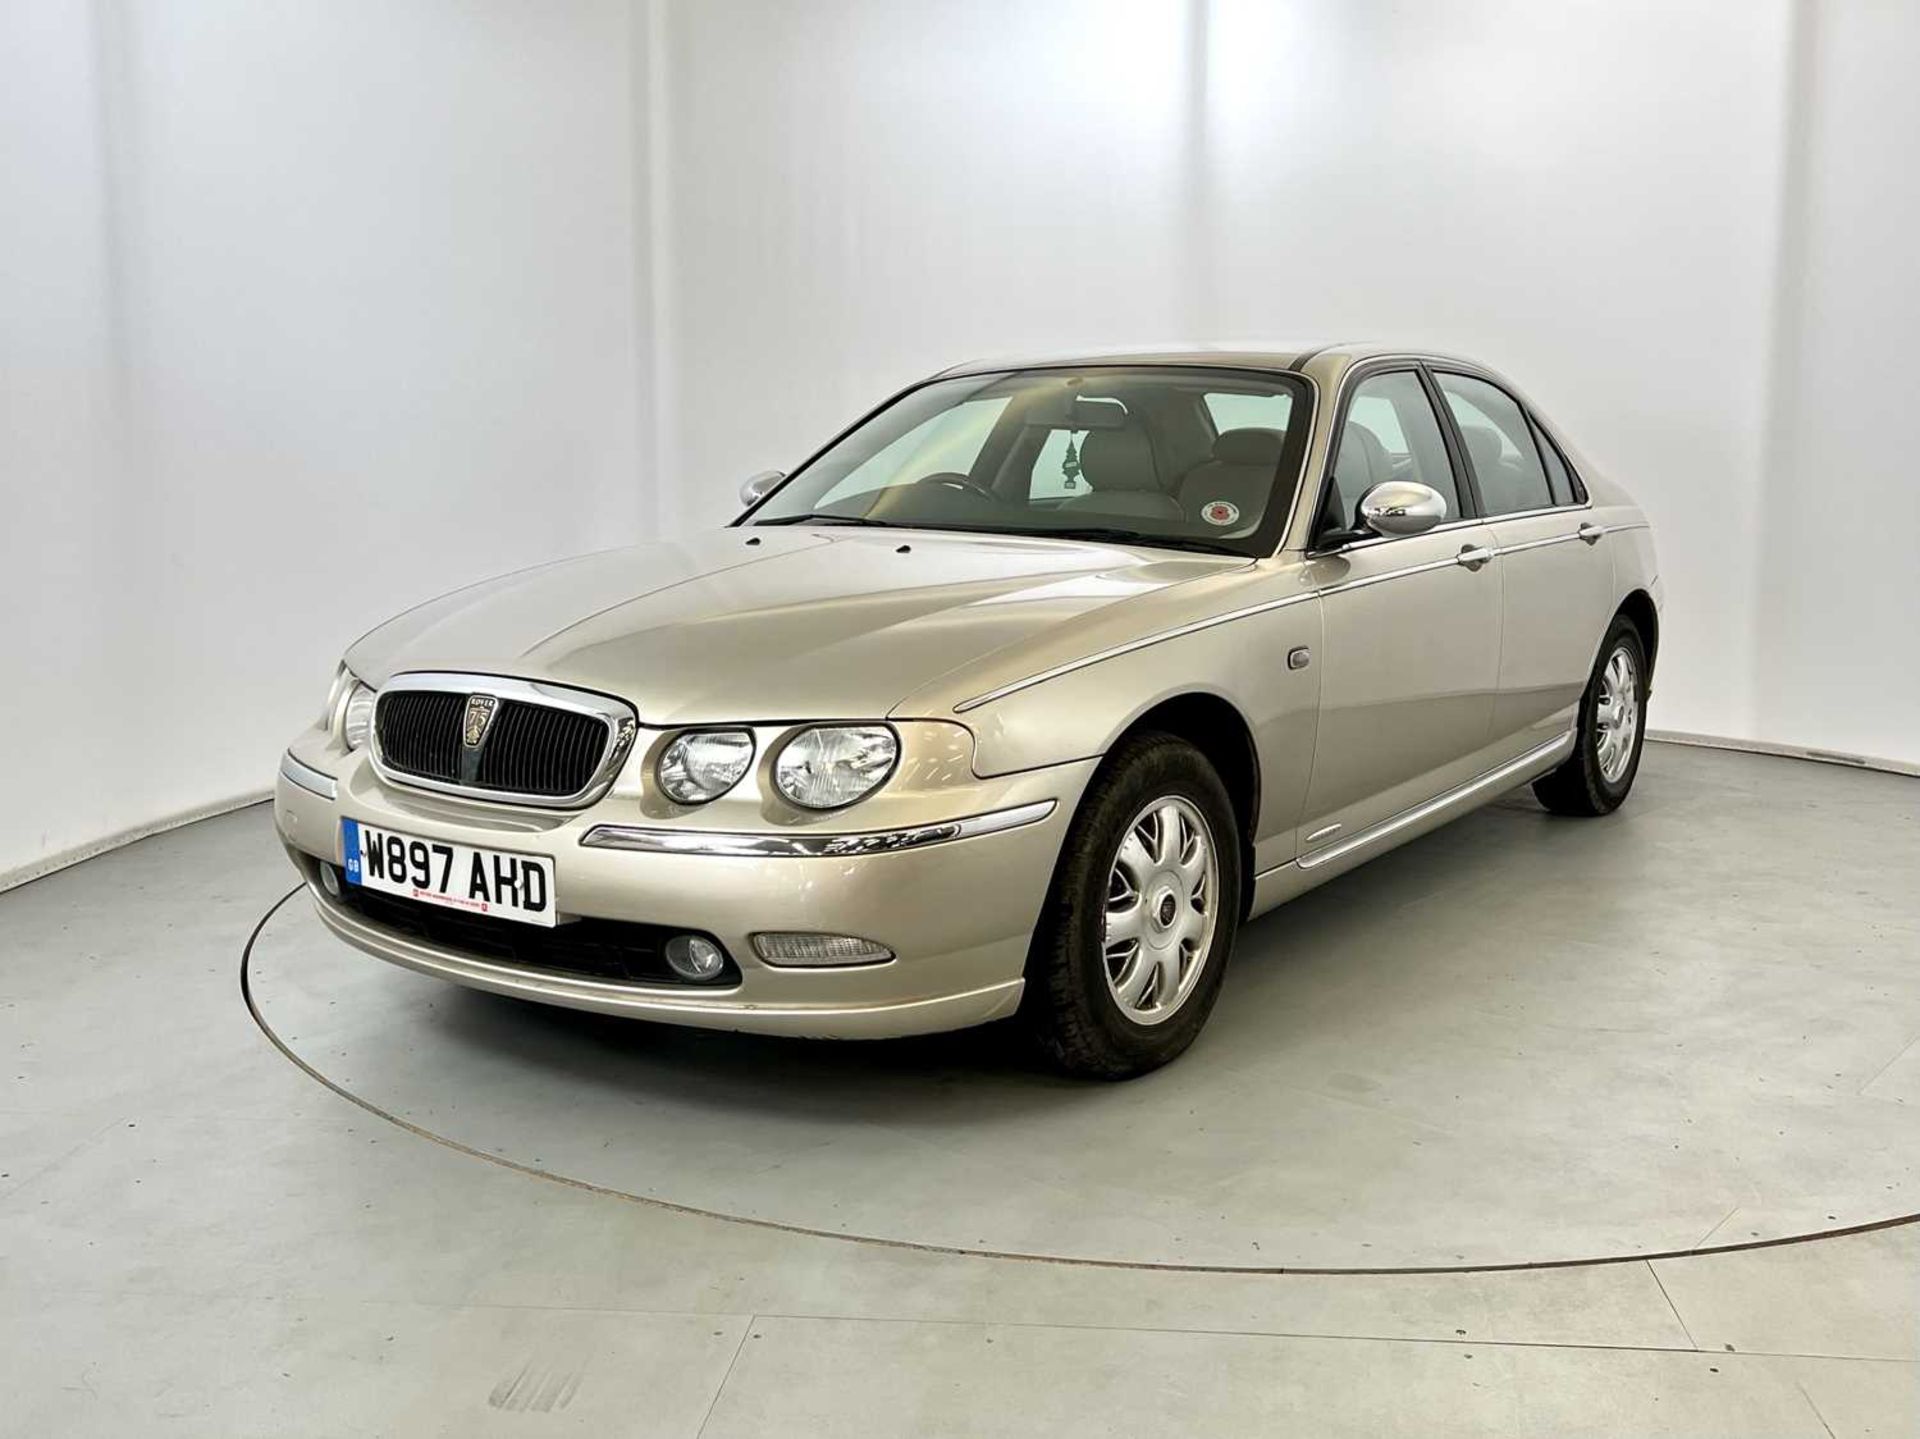 2000 Rover 75 Connoisseur - Image 3 of 34